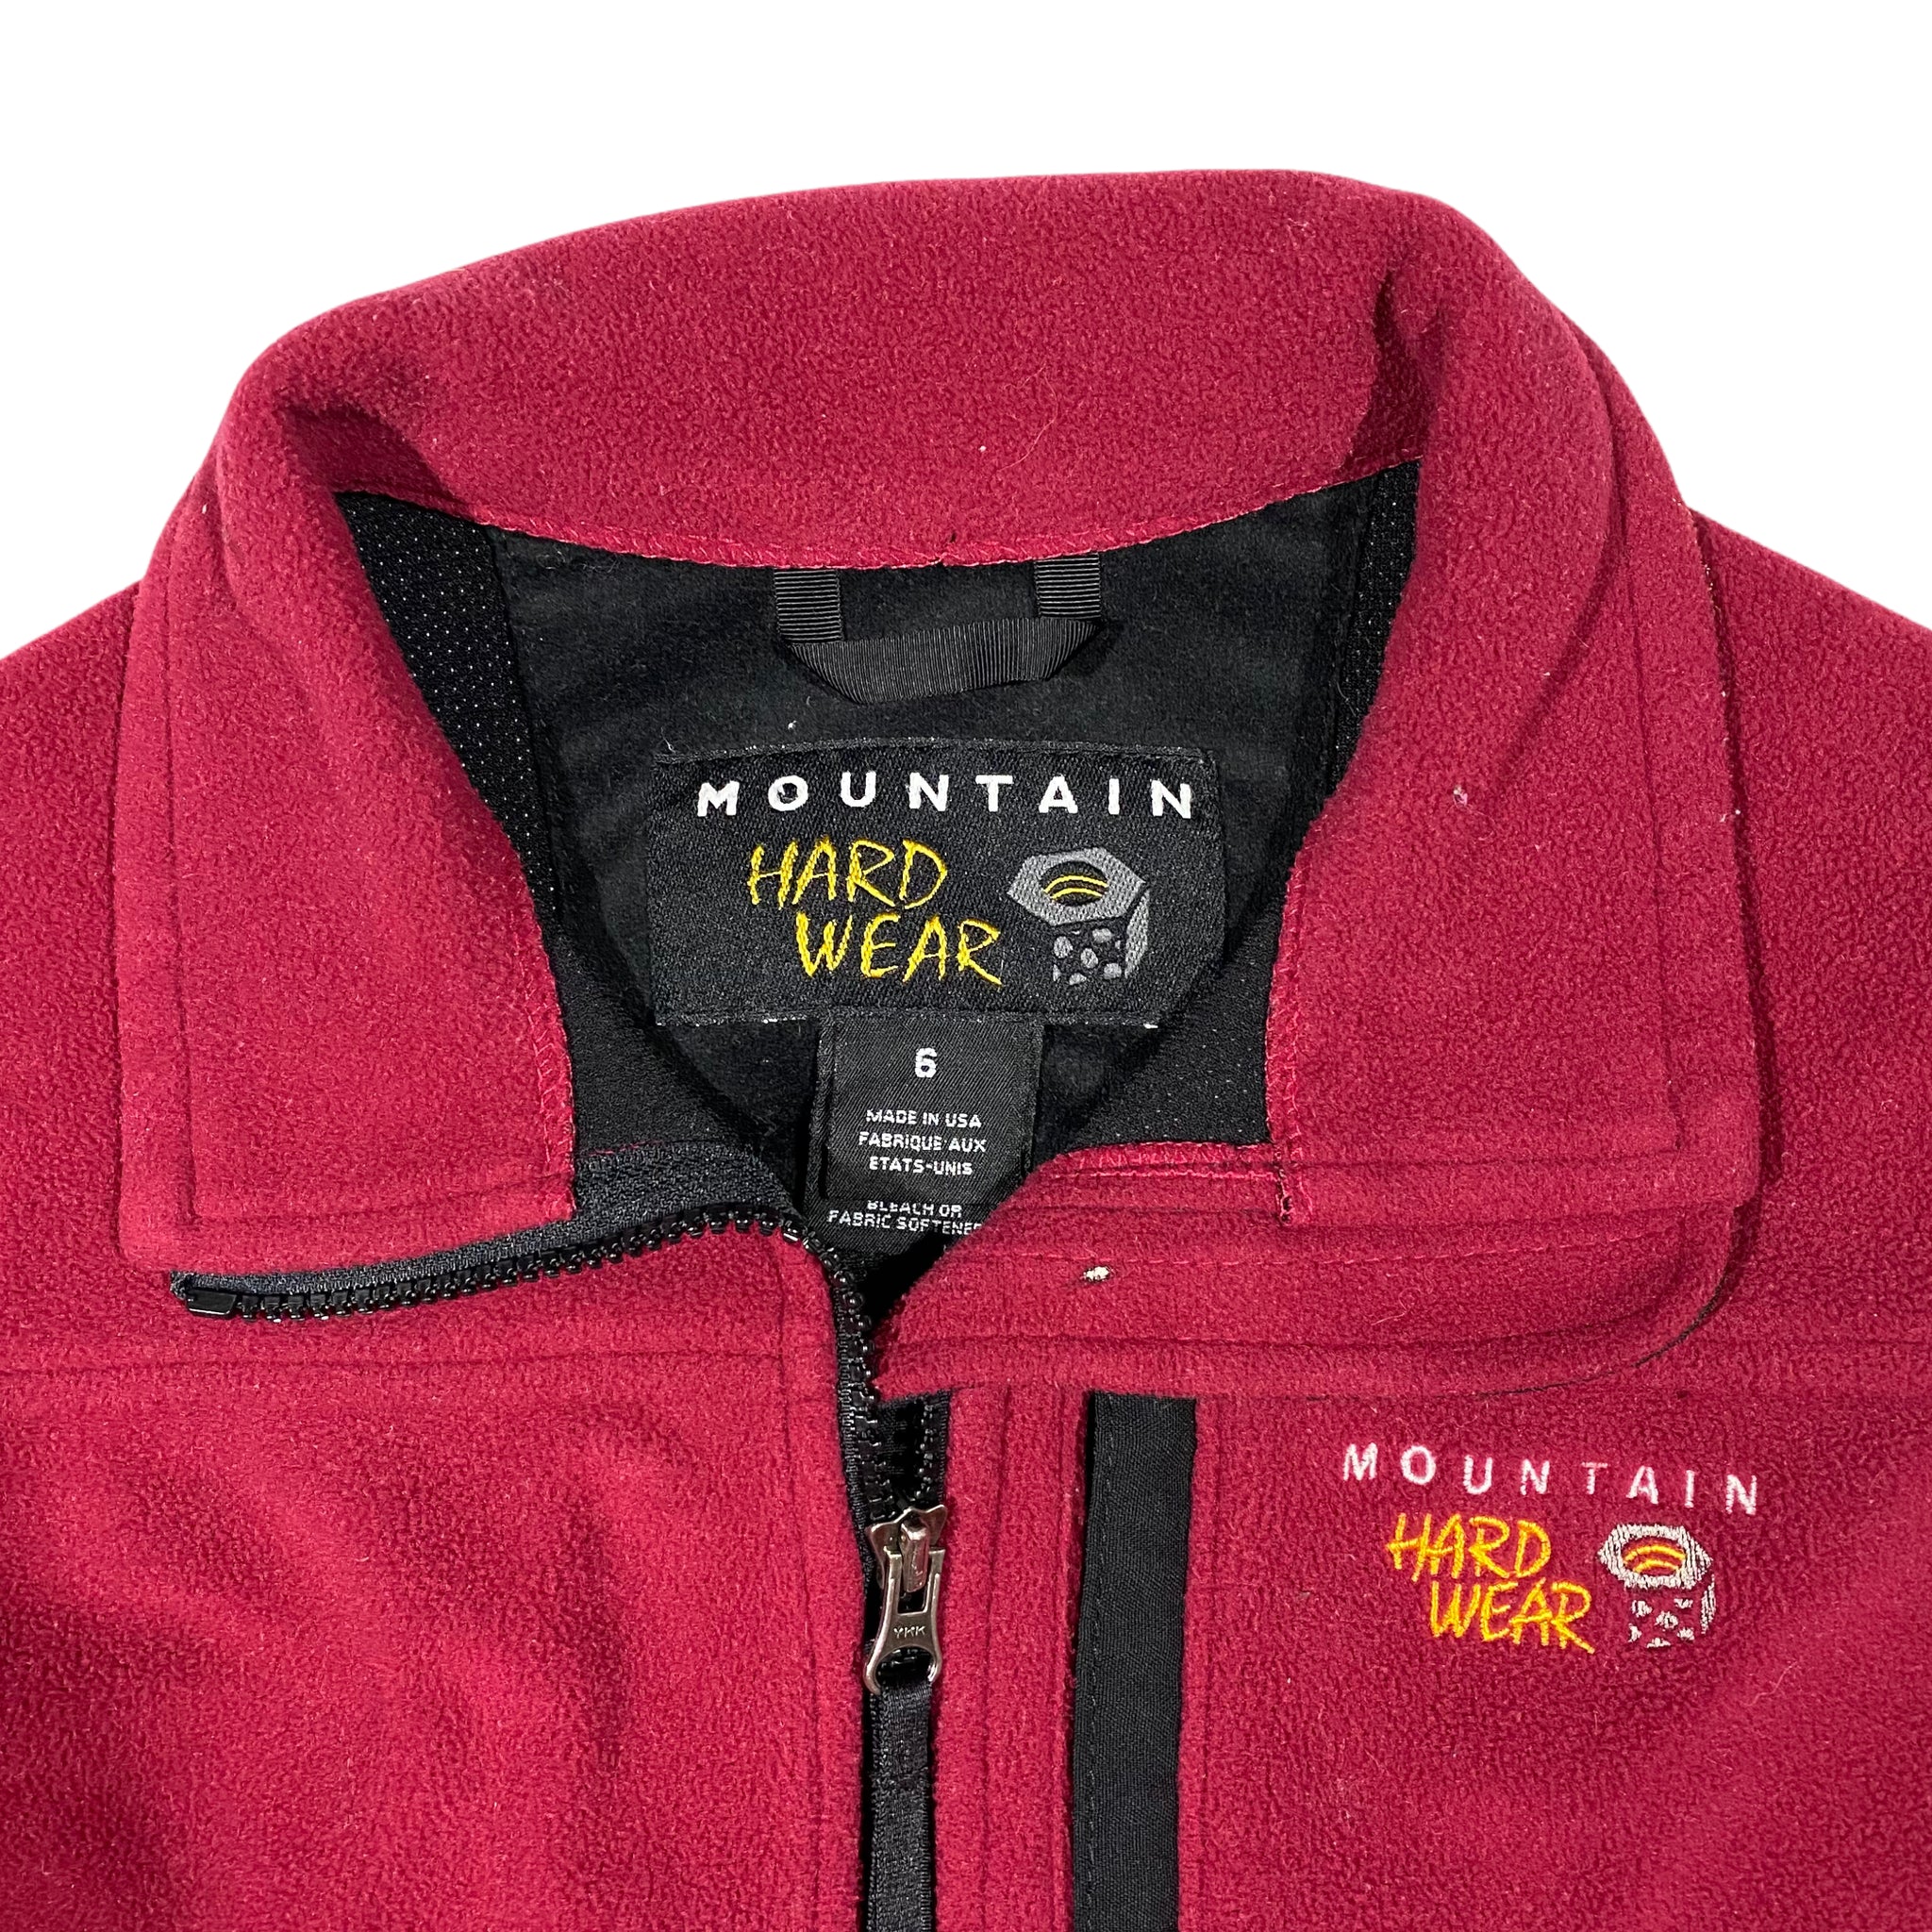 Mountain Hardwear vest. Made in USA. Small (19x23)